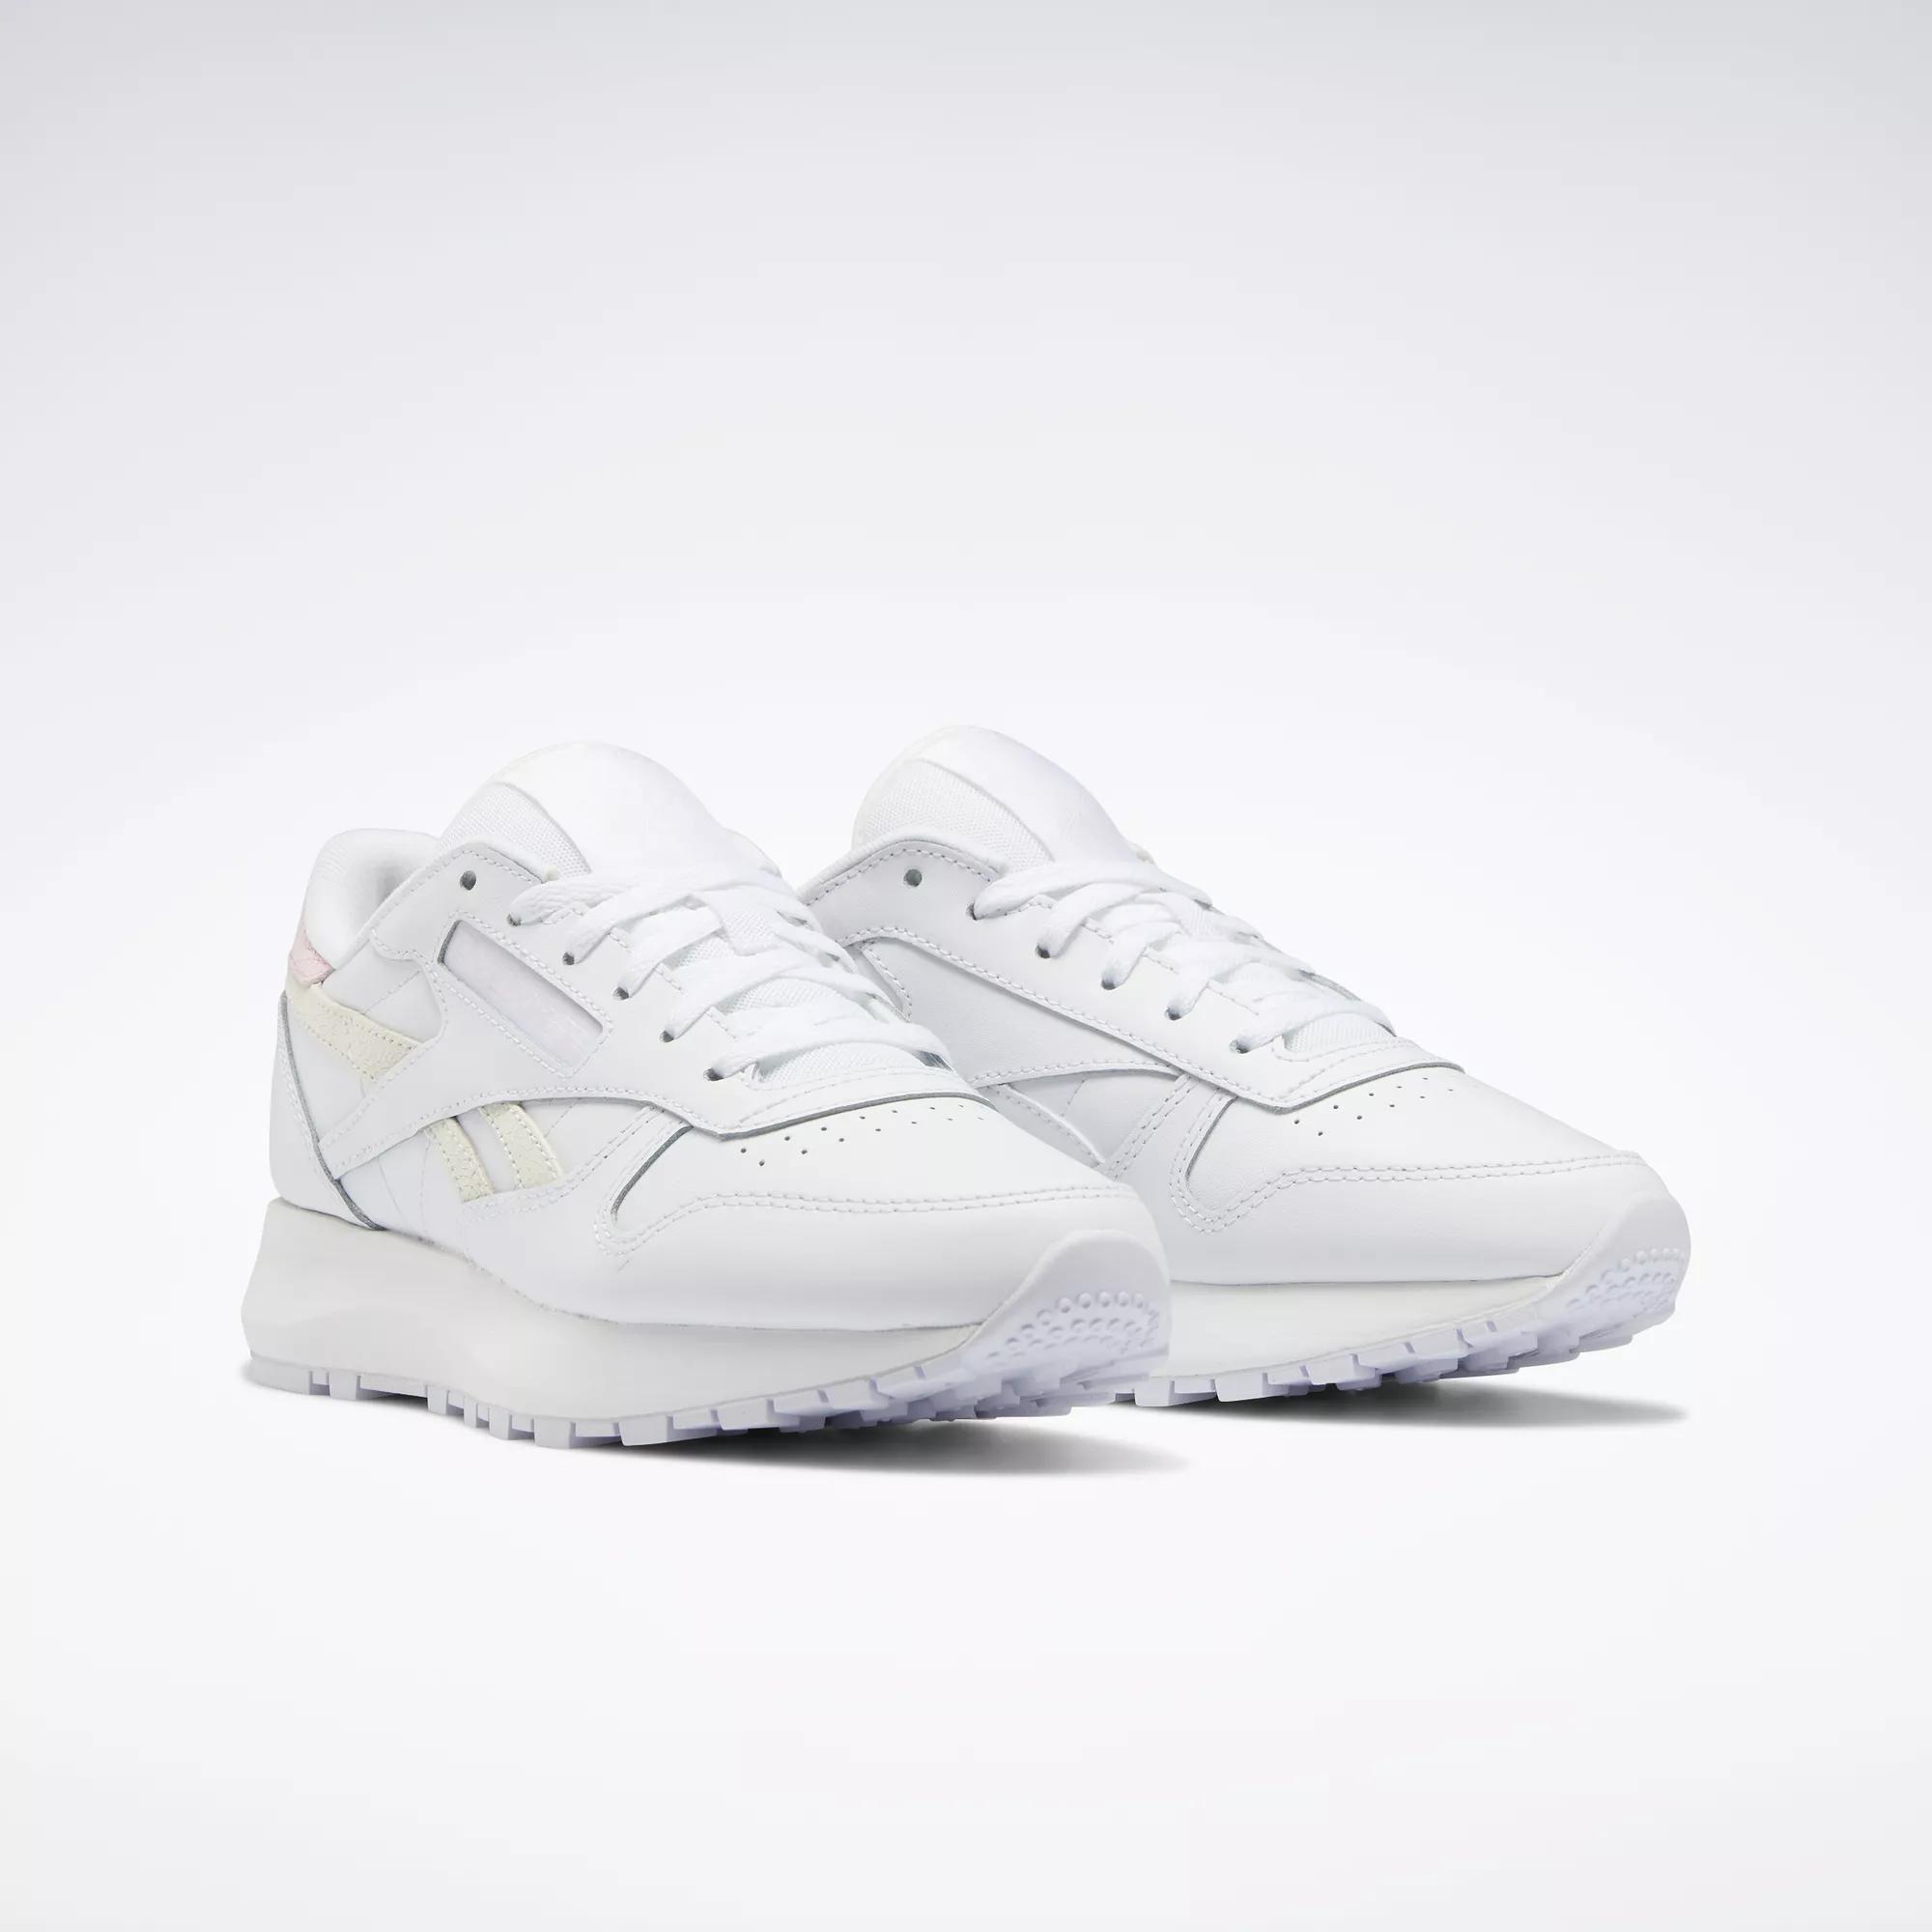 Classic Leather SP Women's Shoes - Ftwr White / Ftwr White